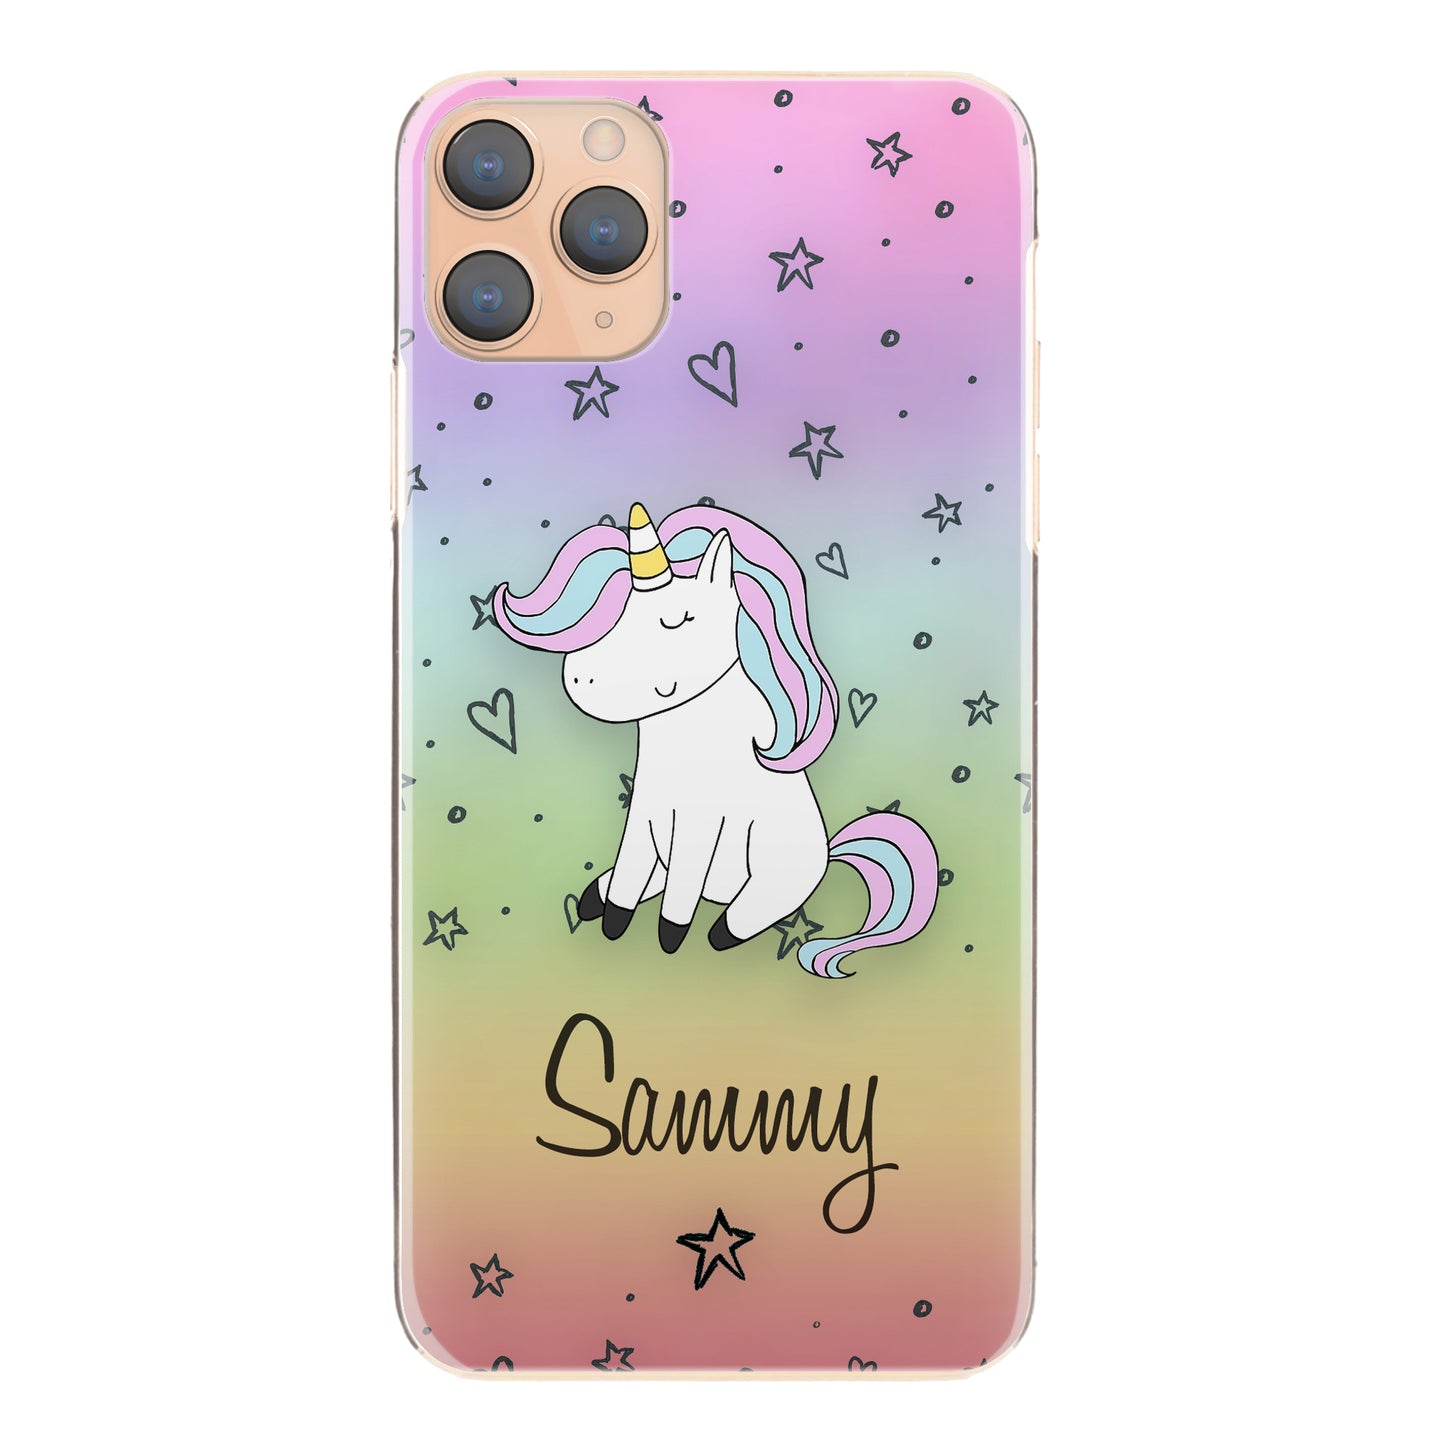 Personalised Xiaomi Phone Hard Case with Pink and Blue Unicorn on Rainbow Stars and Hearts